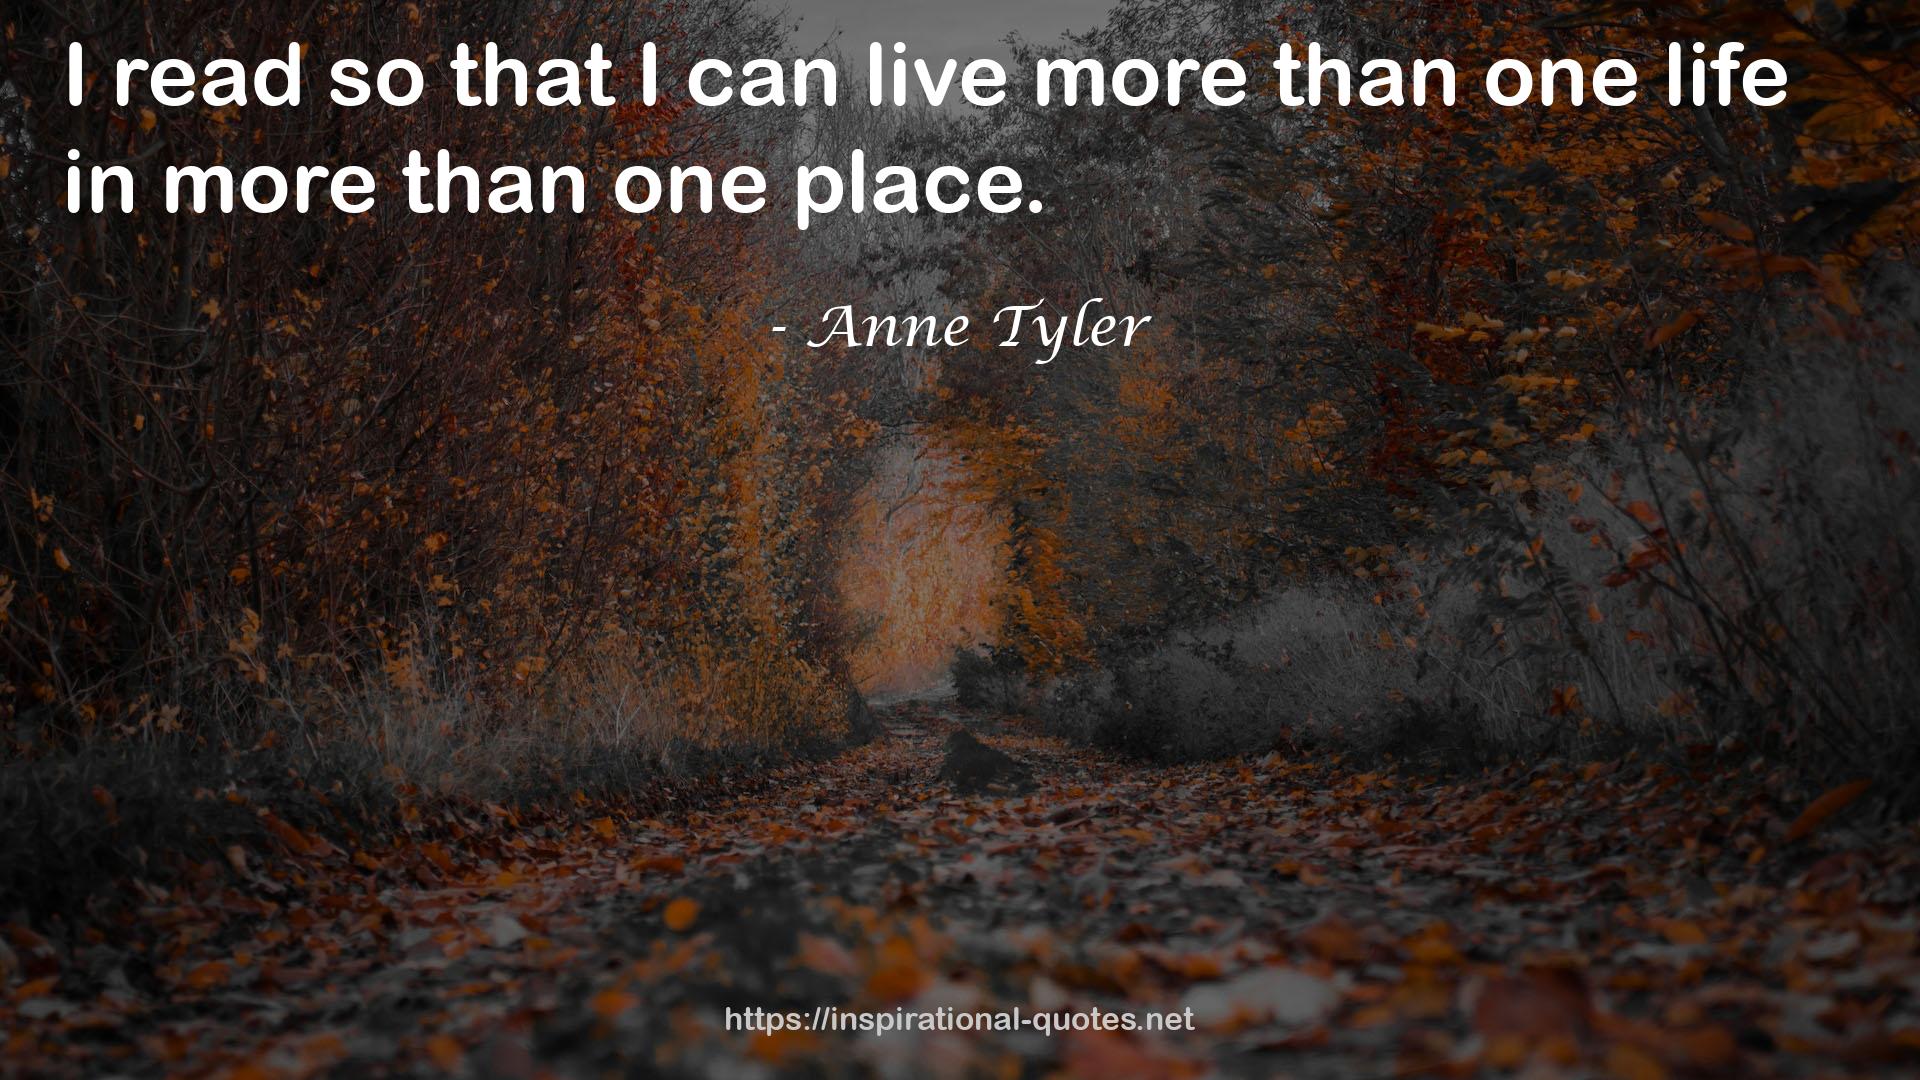 Anne Tyler QUOTES